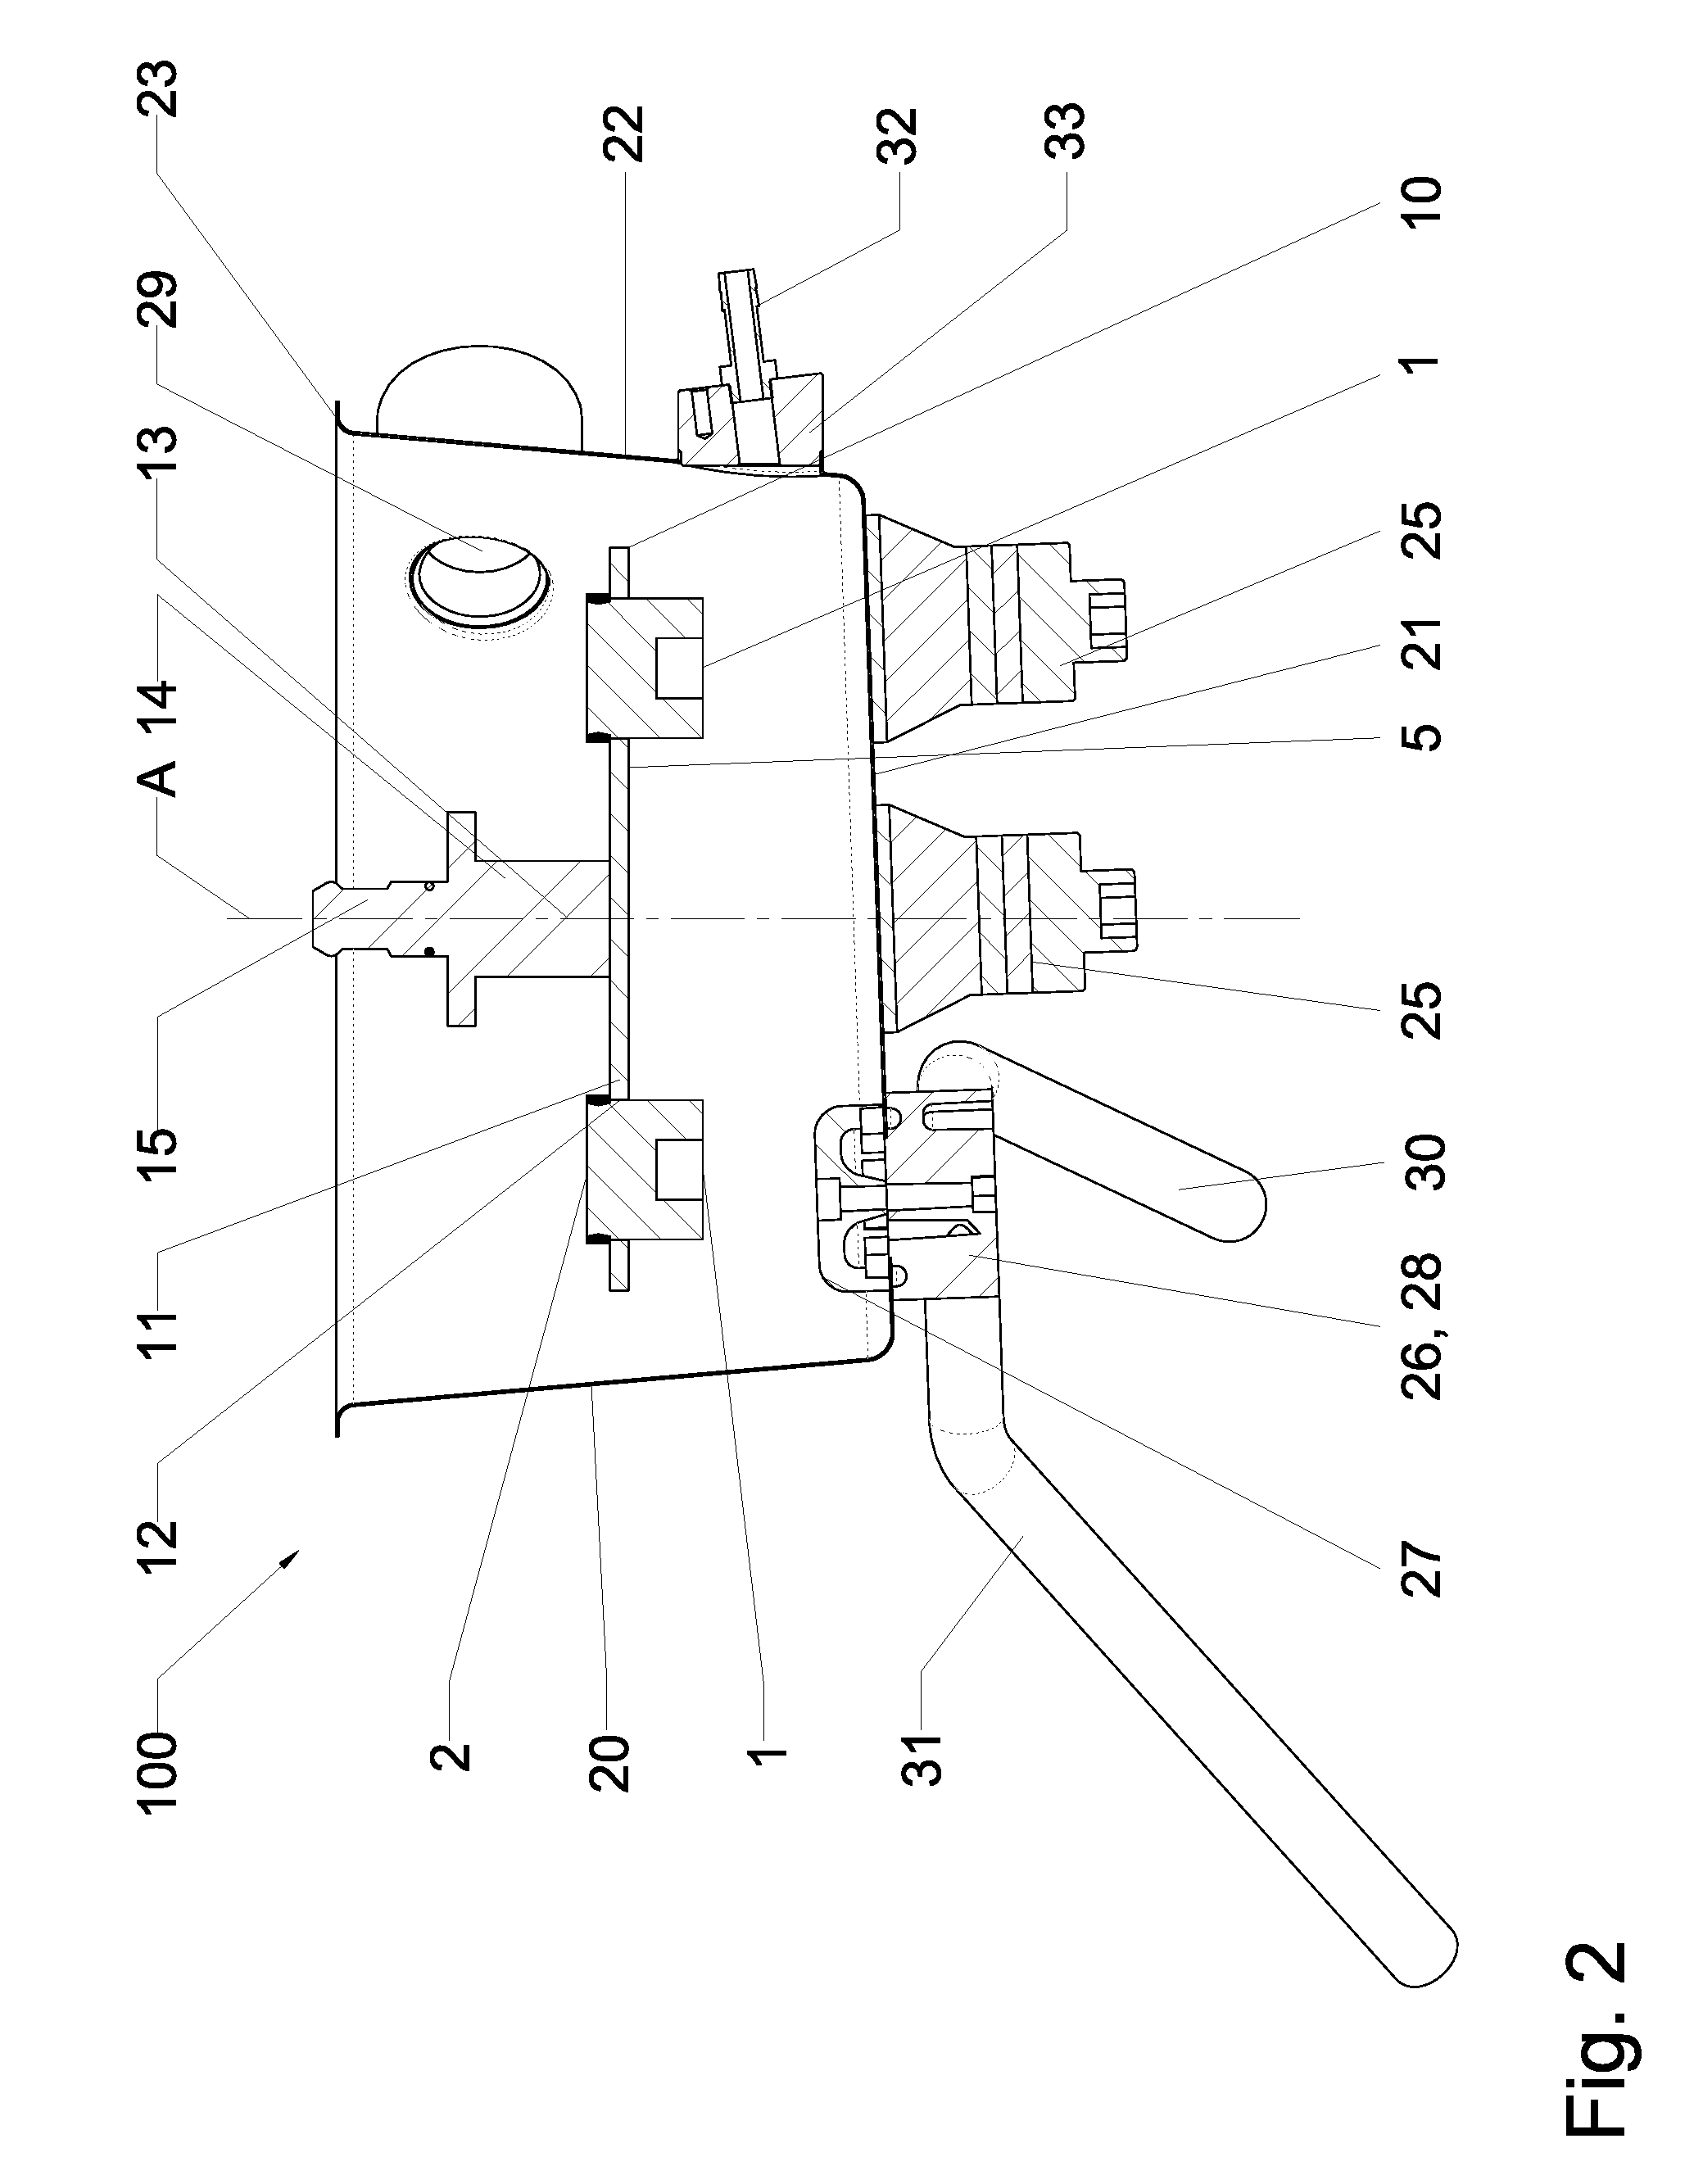 A method of, and an apparatus for, rinsing materialographic samples